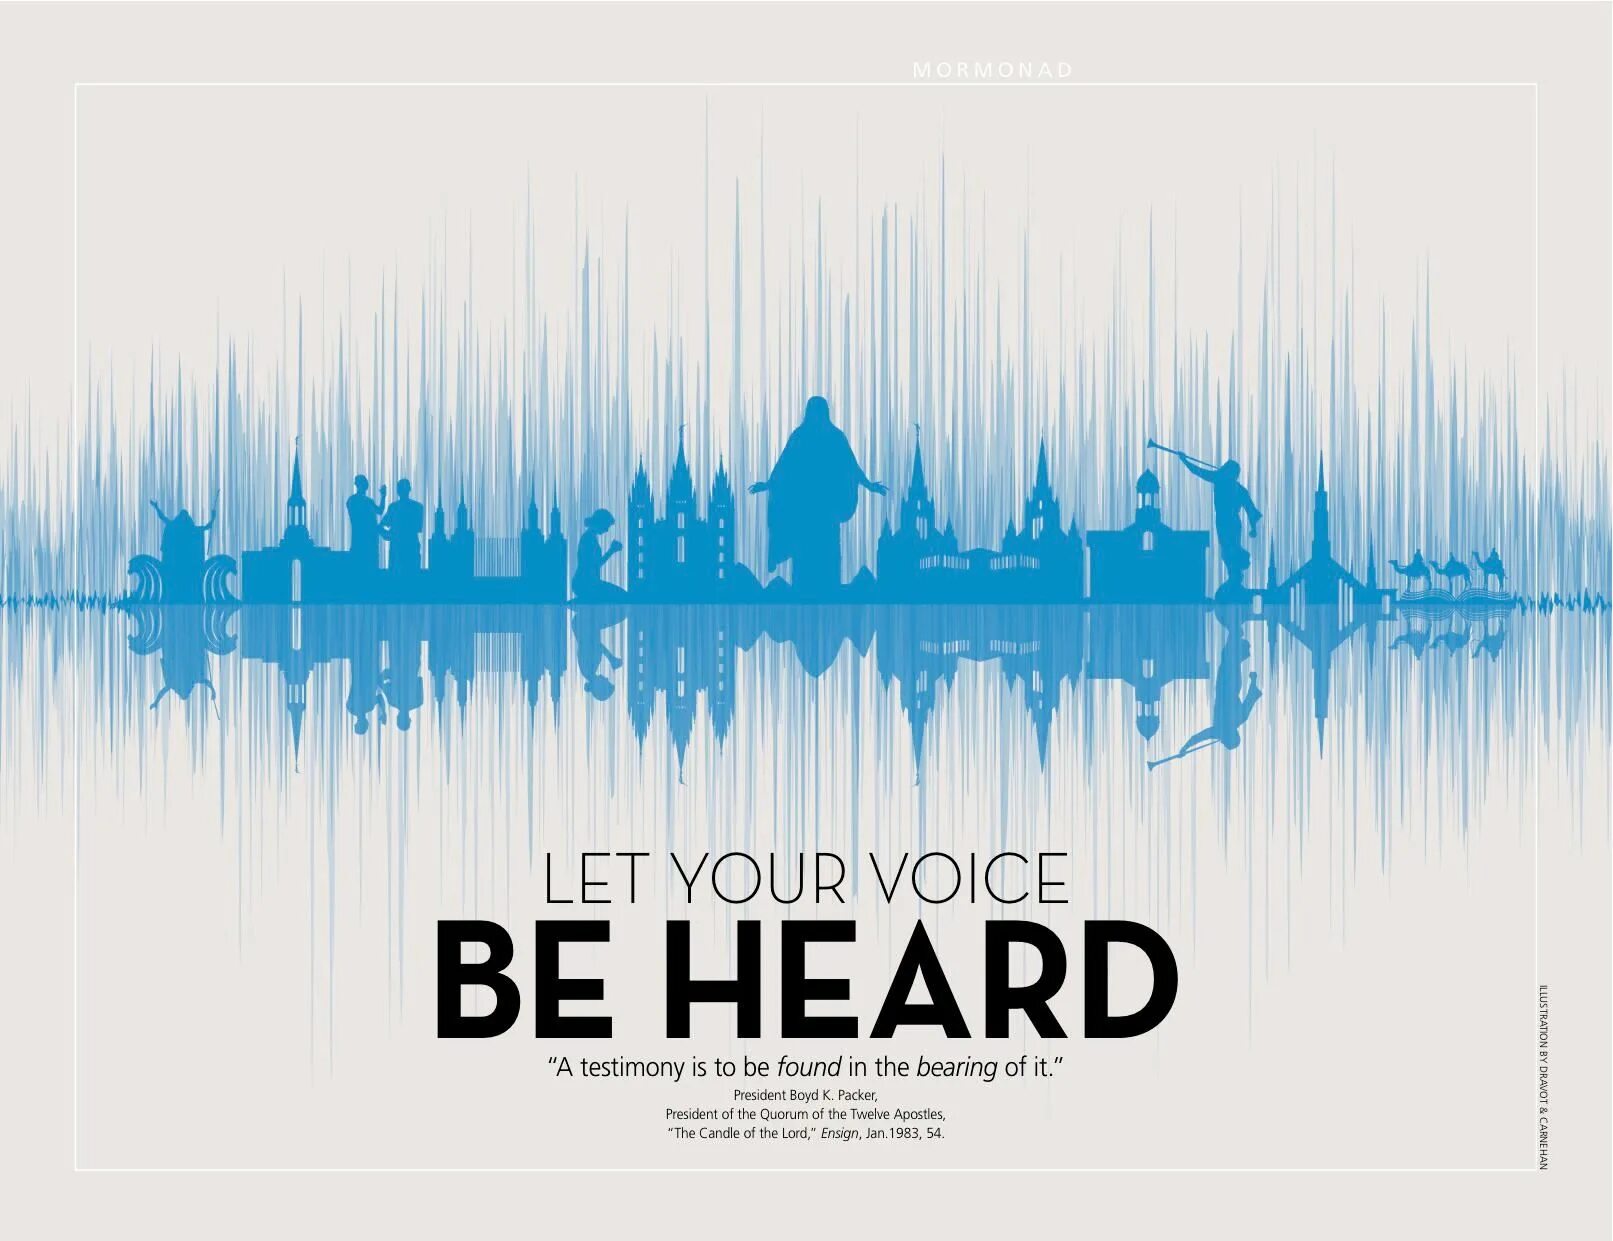 Your Voice. Be heard. Your Voice картинки. Your__Voice приват. Voice should be